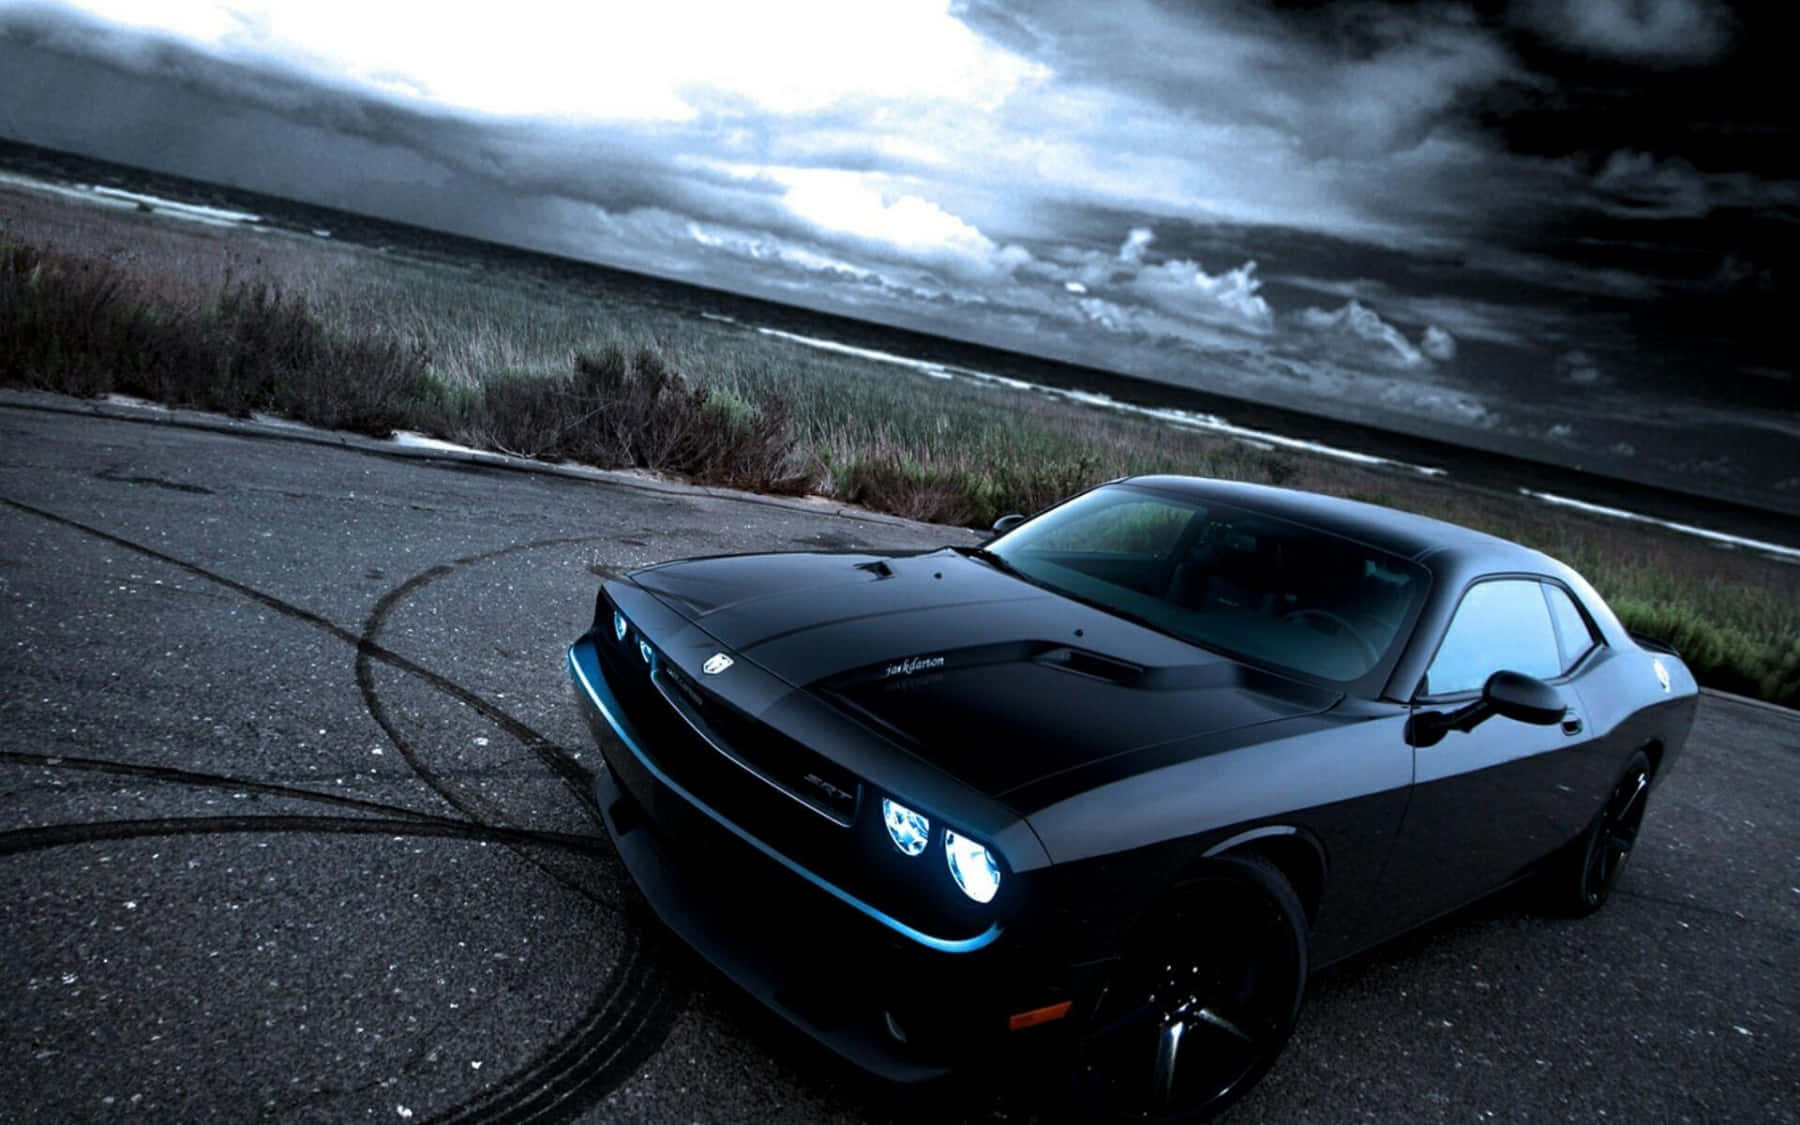 The Road To Freedom Begins With The Legendary Hellcat